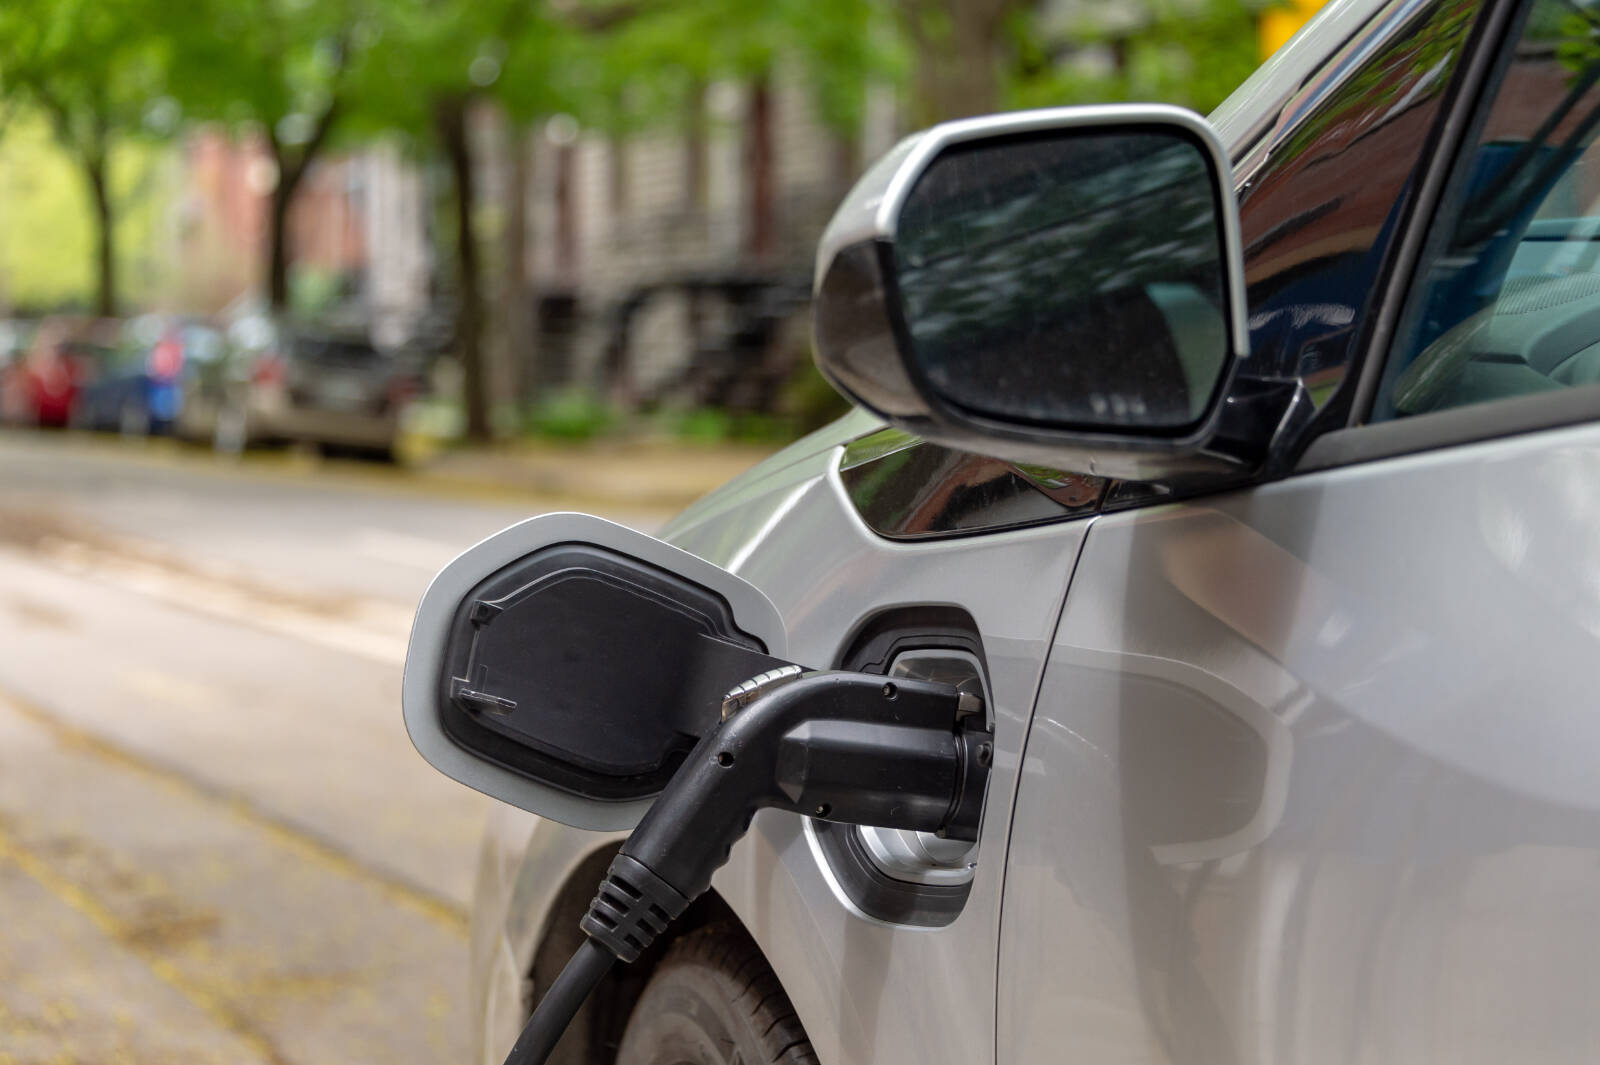 While incentives are key to encouraging more people to buy electric, it’s also essential to ensure a robust network of charging stations keeps pace.